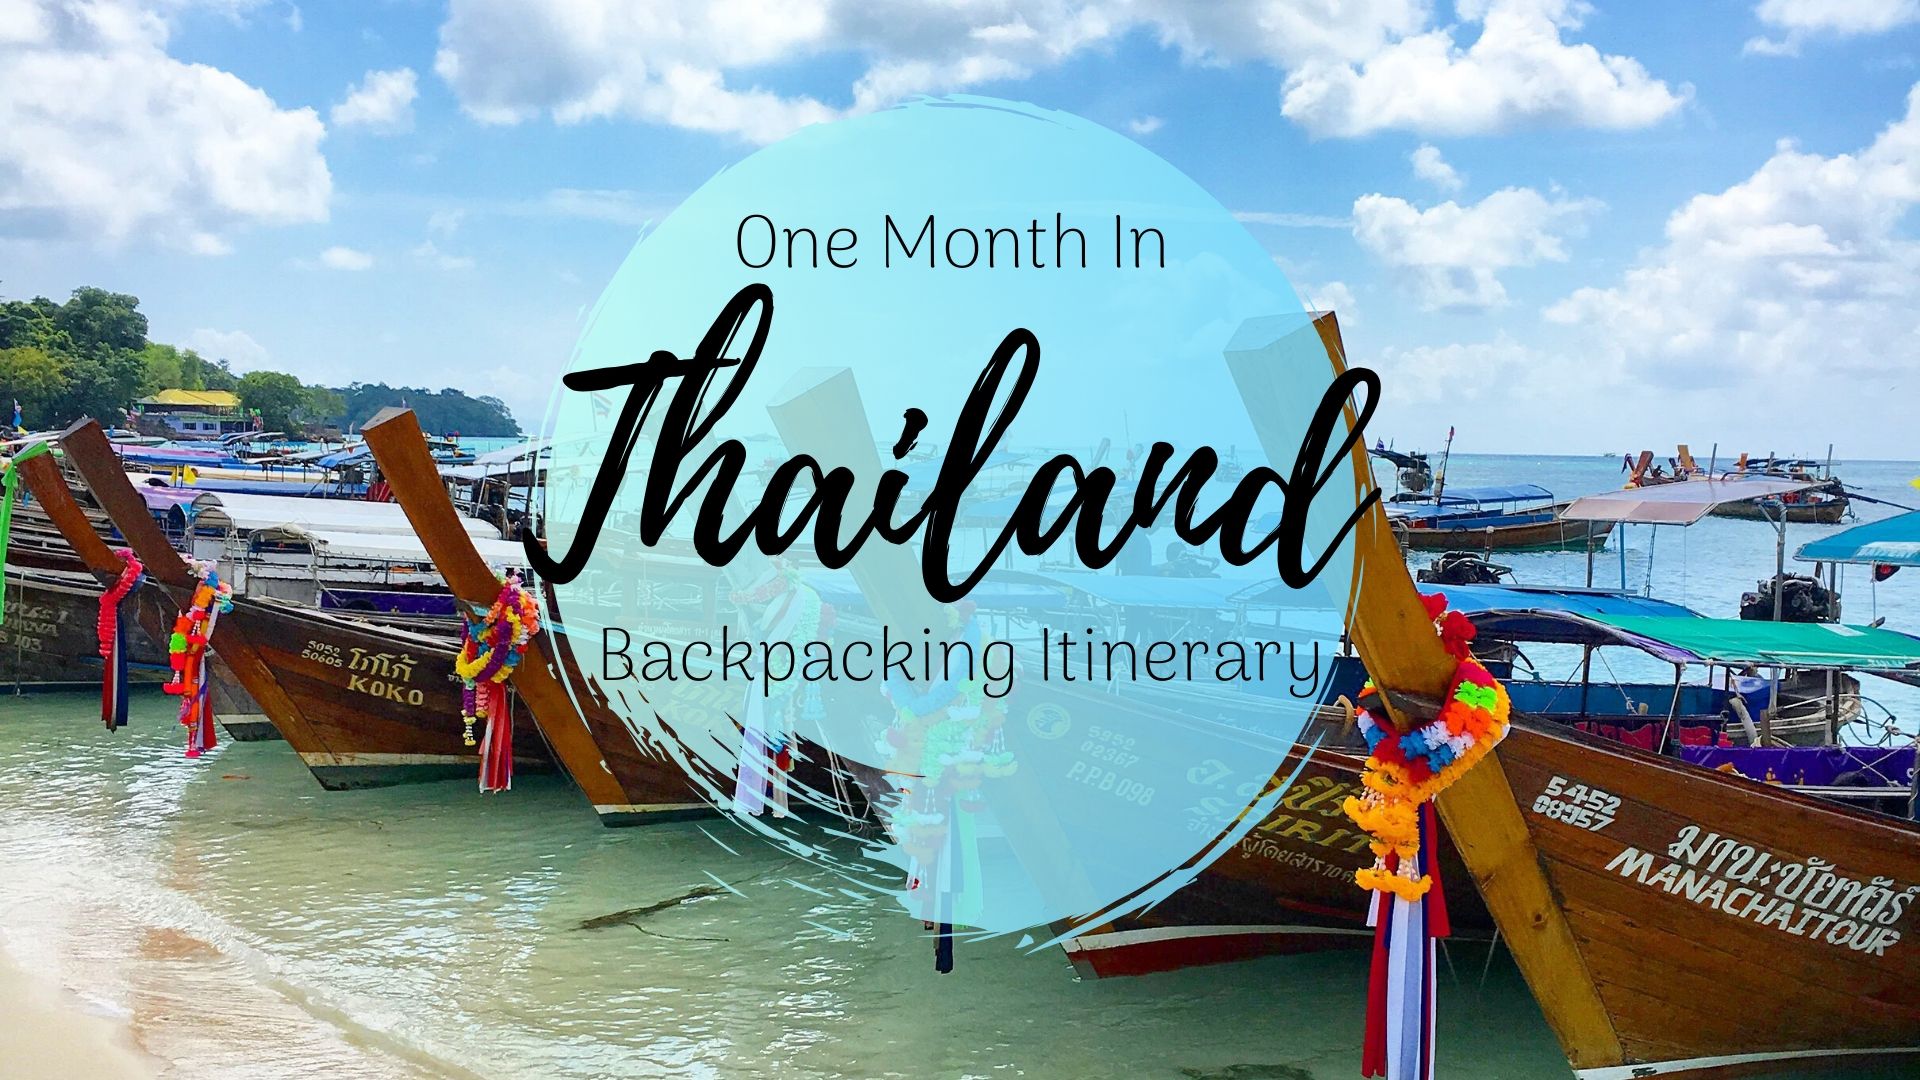 One month in thailand itinerary, thailand backpacking, thailand backpacker's route, cover